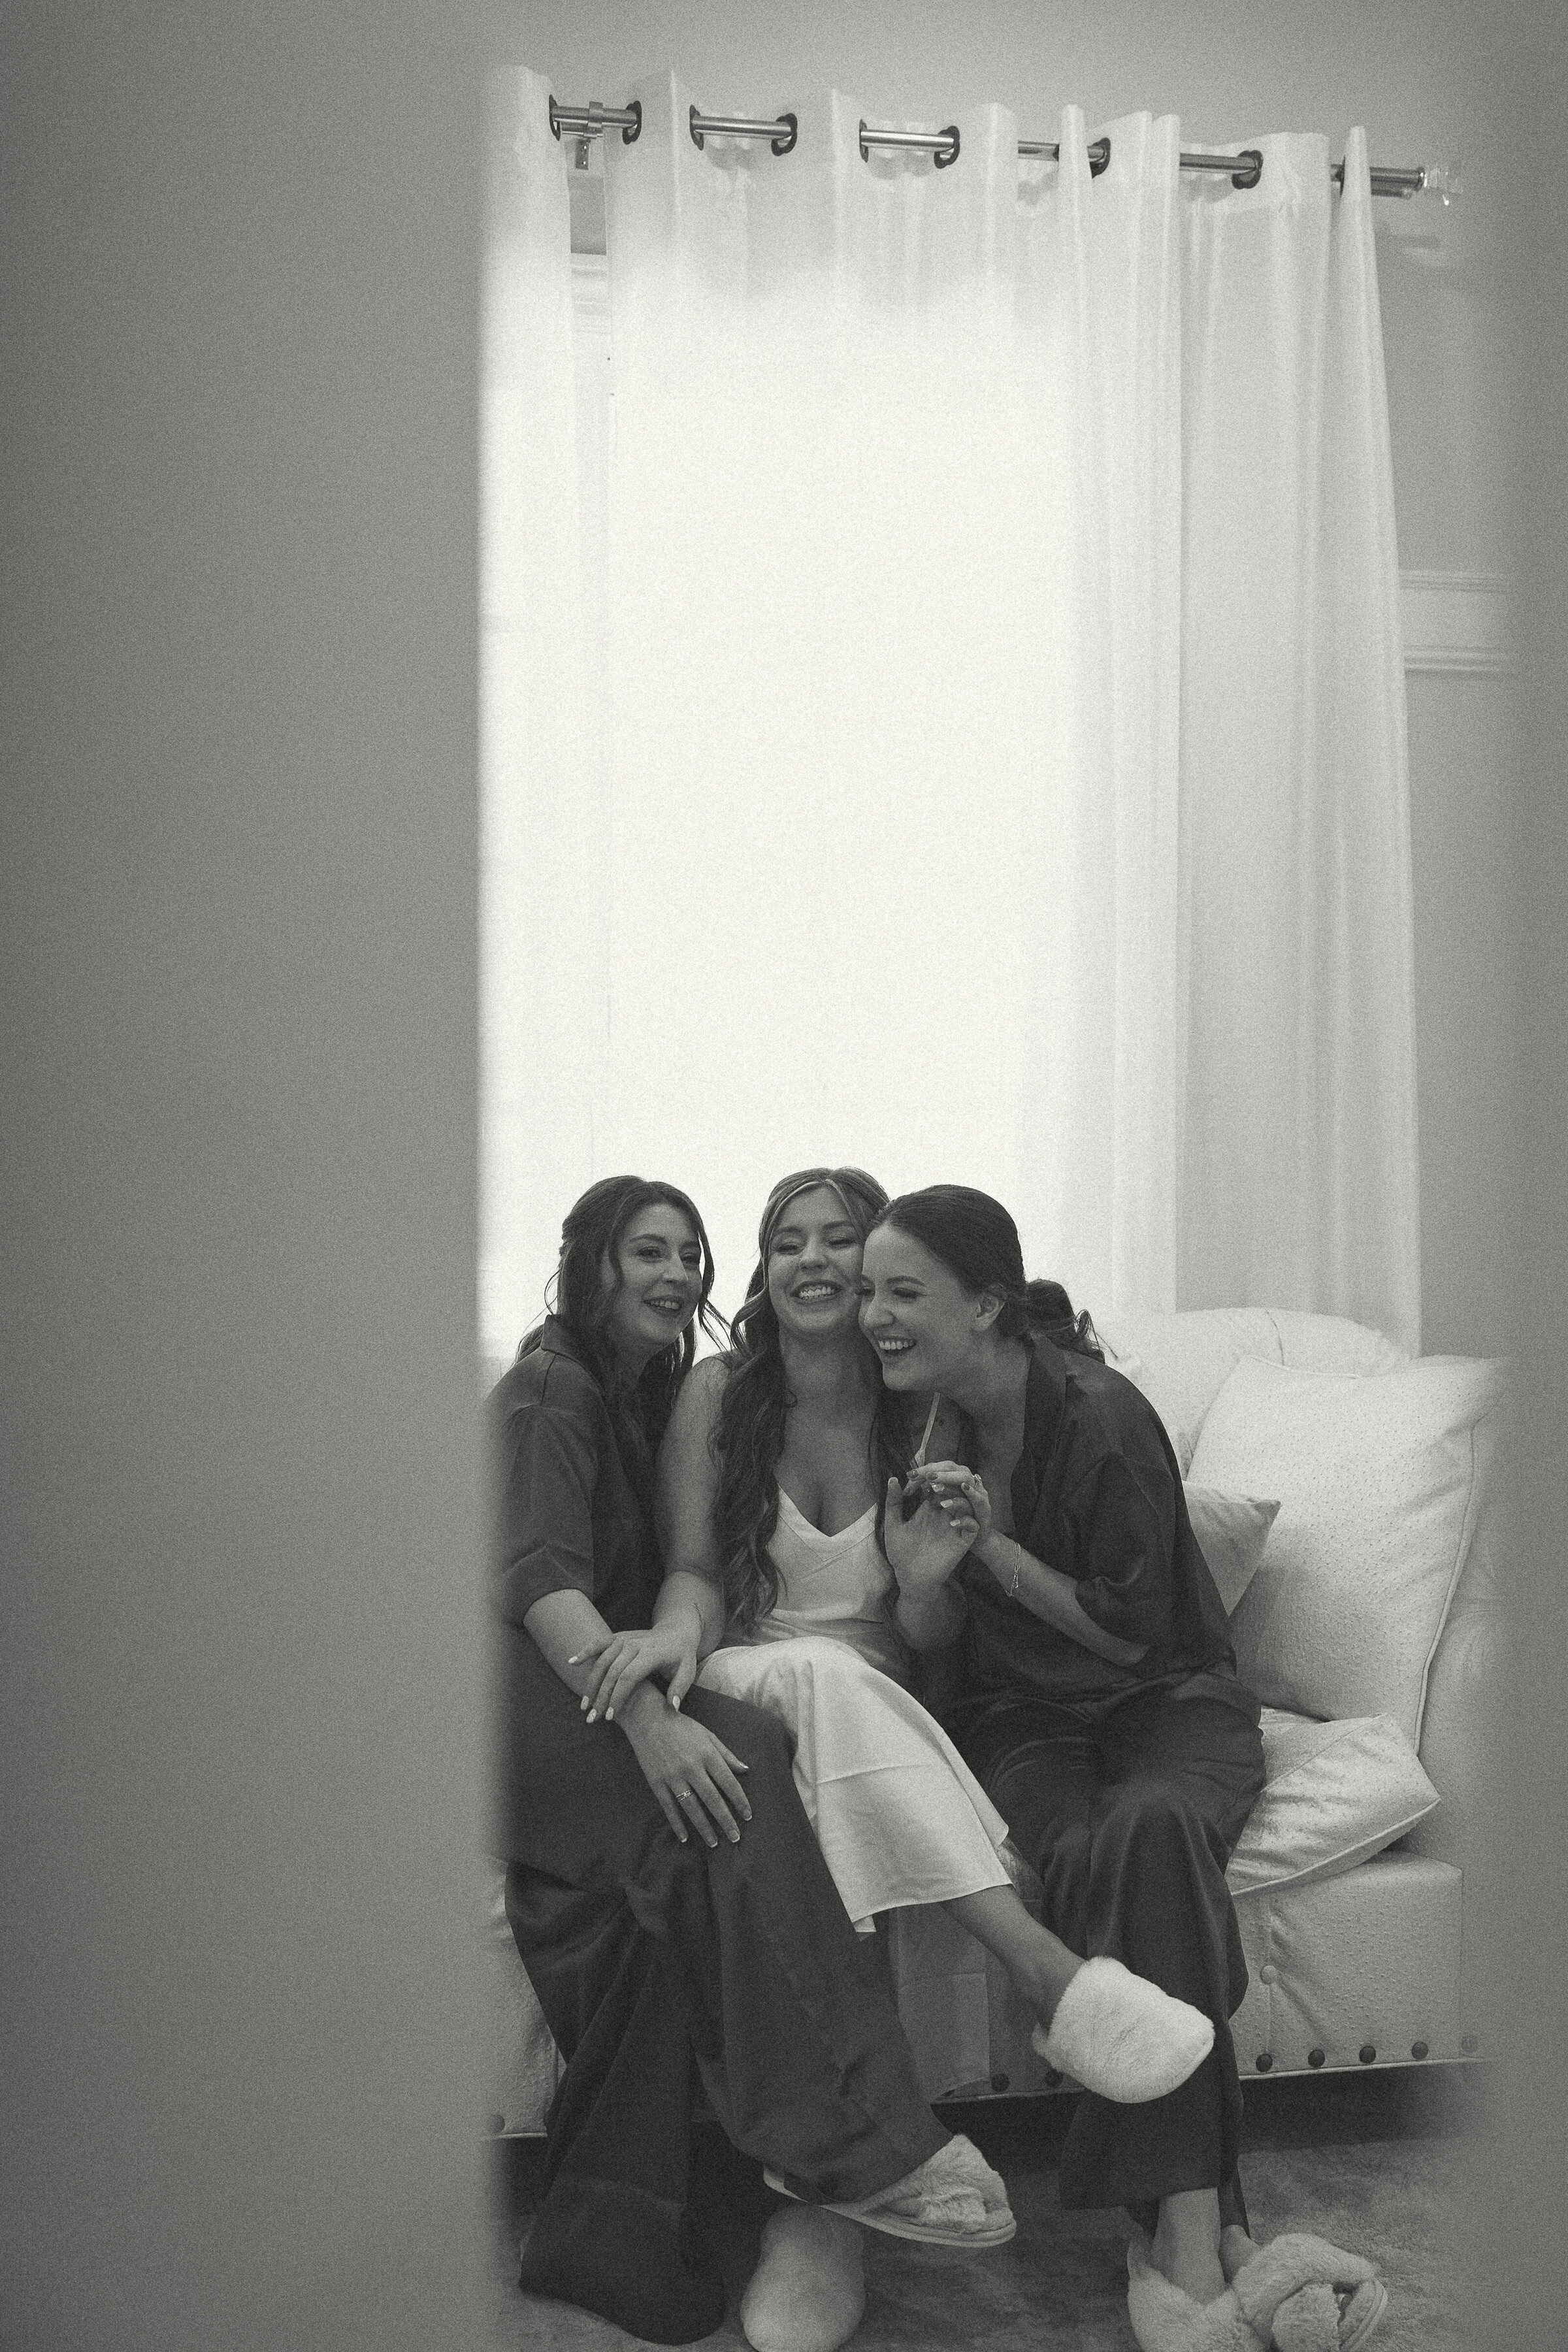 Bride and bridesmaids laughing together, candid moment during wedding preparations.